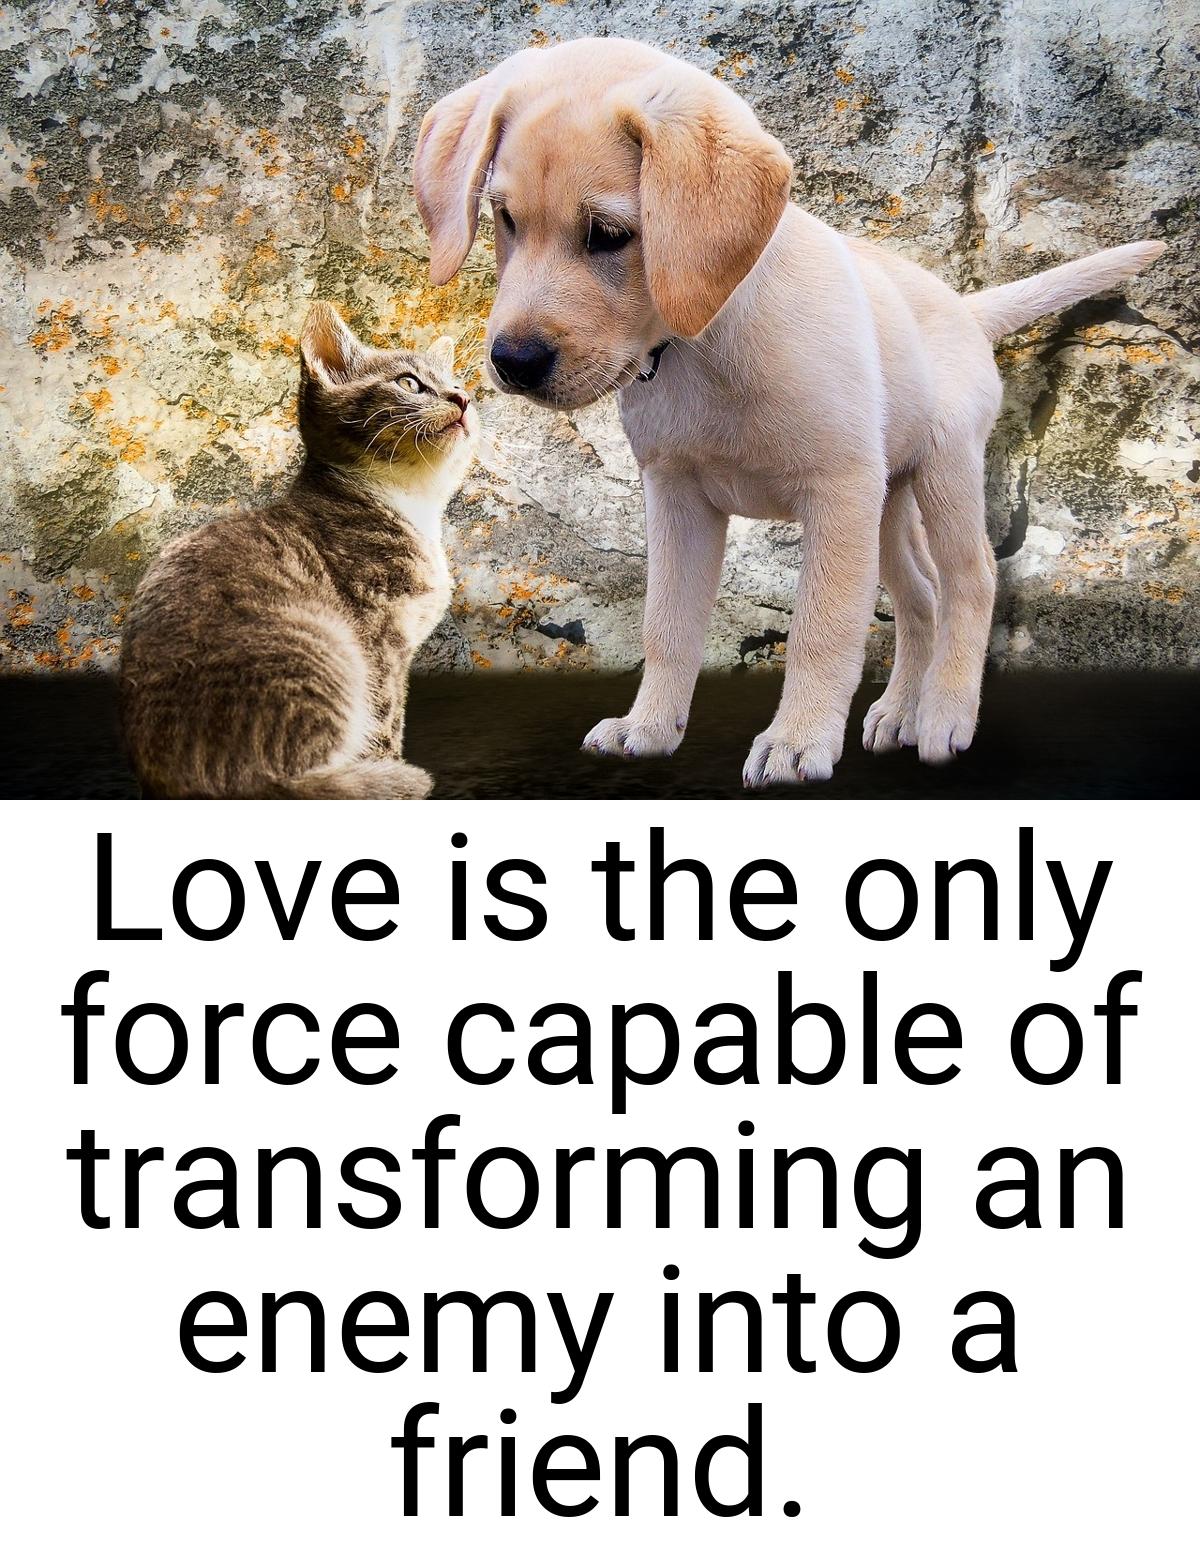 Love is the only force capable of transforming an enemy